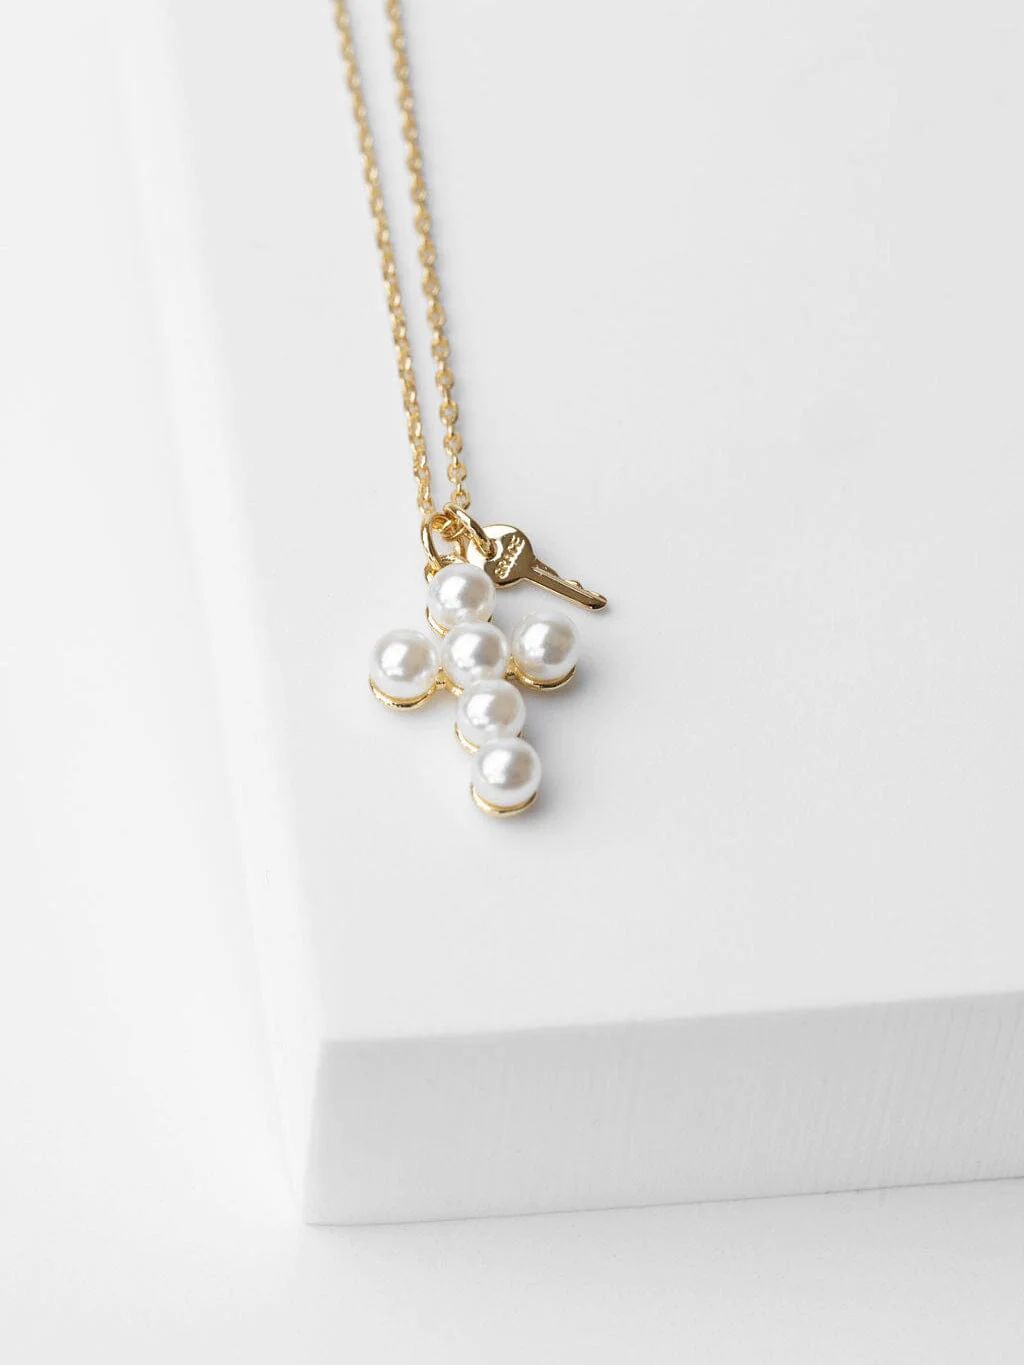 Pearl Cross and Mini Key Necklace | The Giving keys